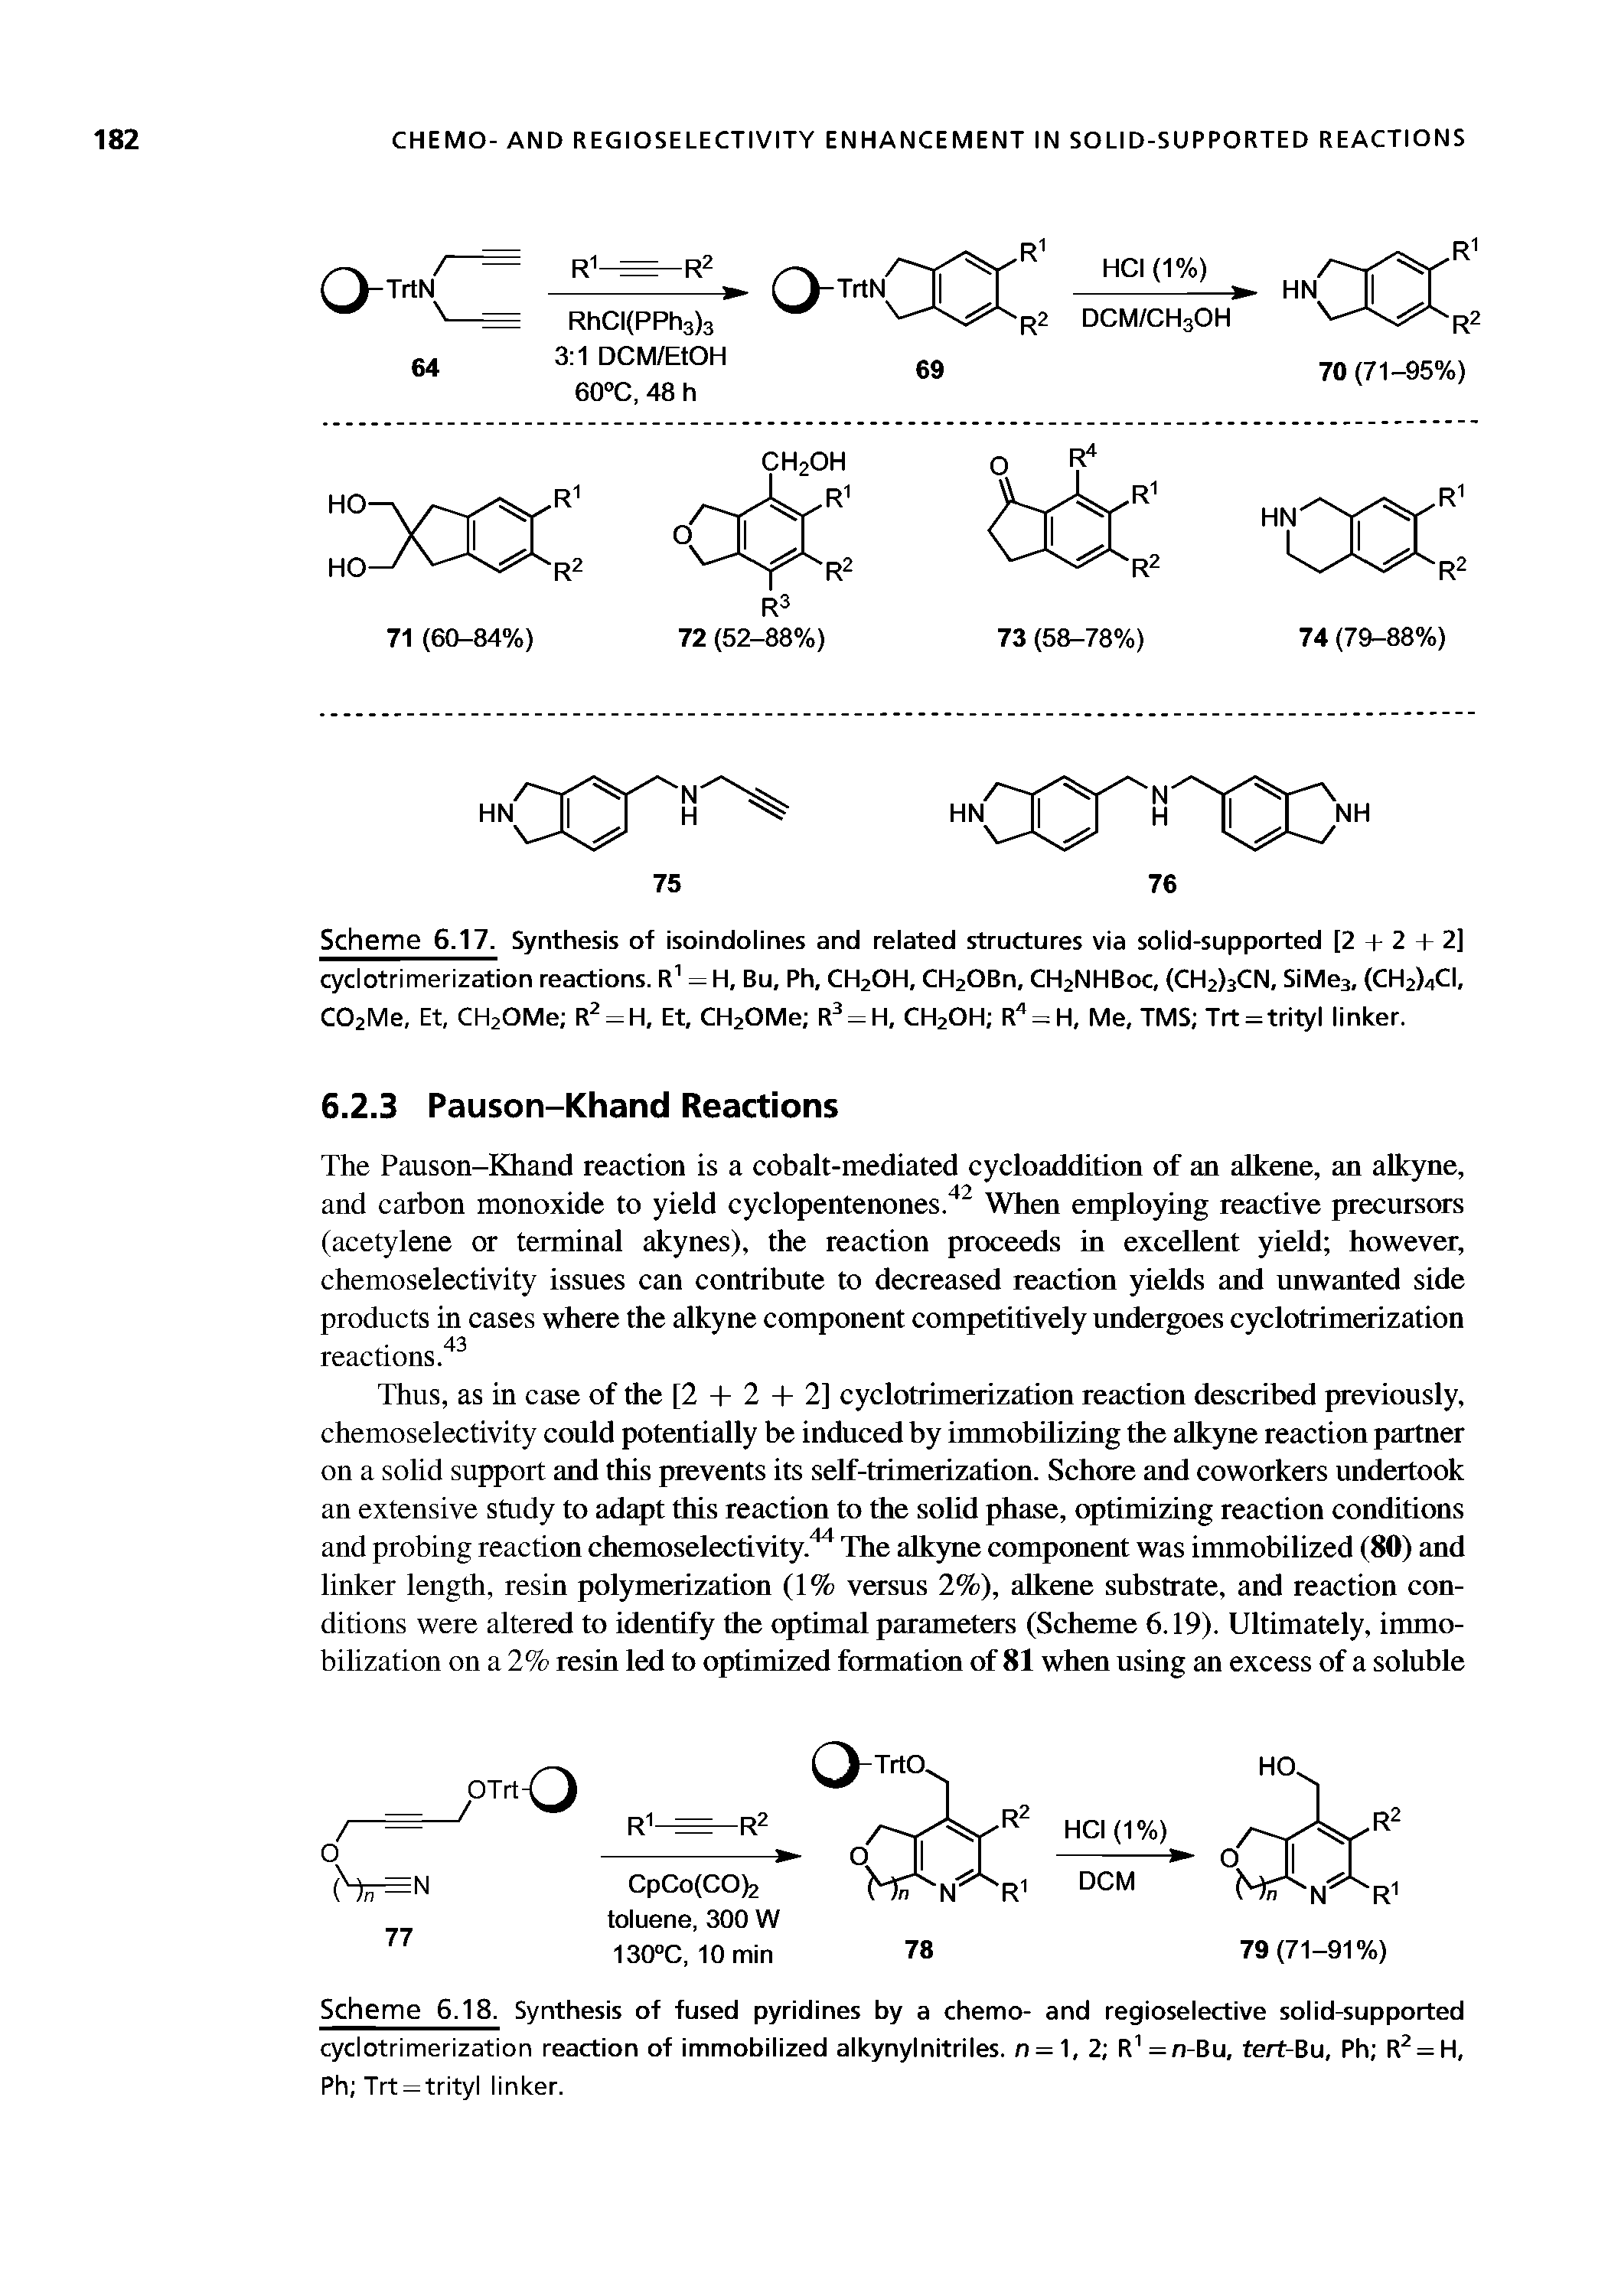 Scheme 6.17. Synthesis of isoindolines and related structures via solid-supported [2 + 2 + 2] cyclotrimerization reactions. R = H, Bu, Ph, CH2OH, CH20Bn, CH2NHB0C, (CH2)3CN, SiMes, (CH2)4CI, C02Me, Et, CH20Me R = H, Et, CH20Me R = H, CH2OH R = H, Me, TMS Trt=trityl linker.